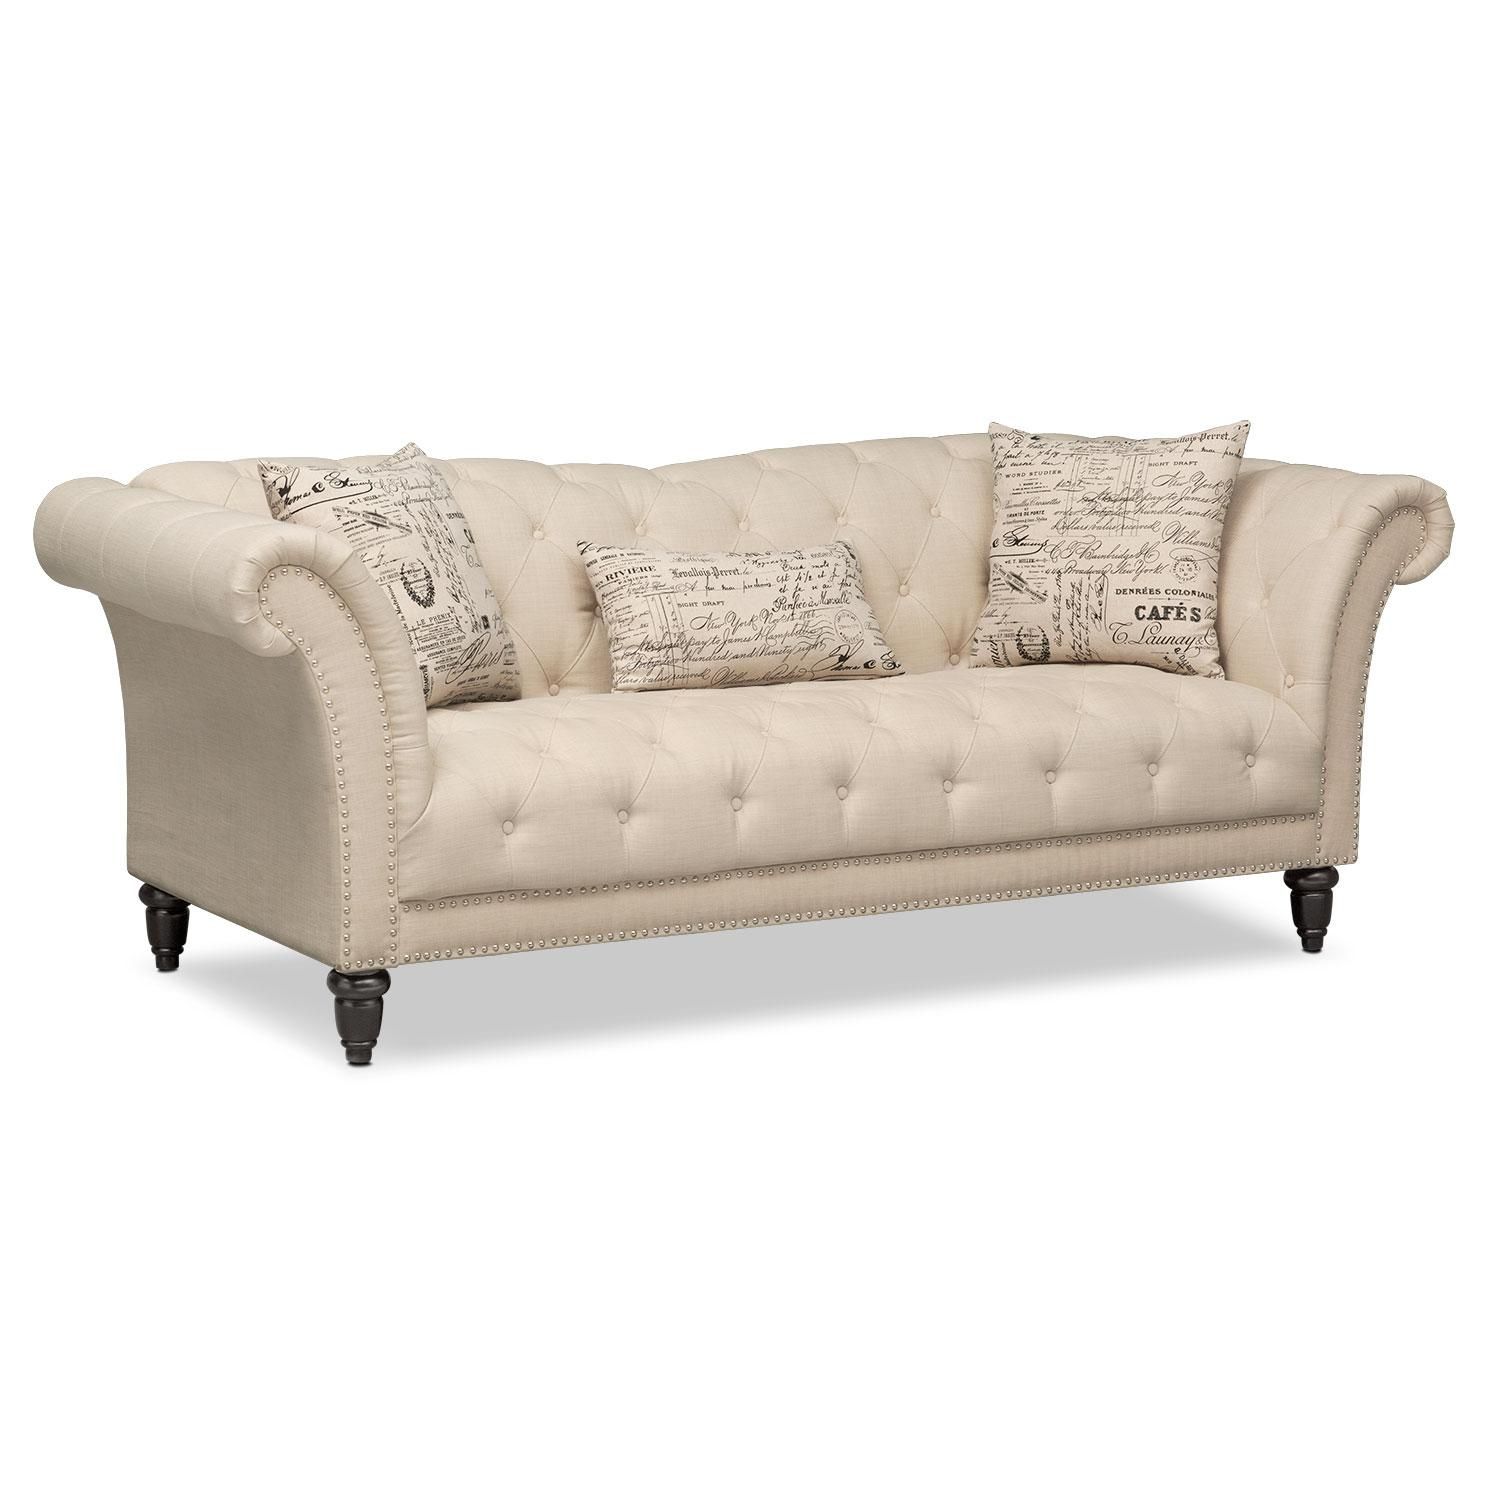 Marisol Sofa – Beige | Value City Furniture For Value City Sofas (View 2 of 20)